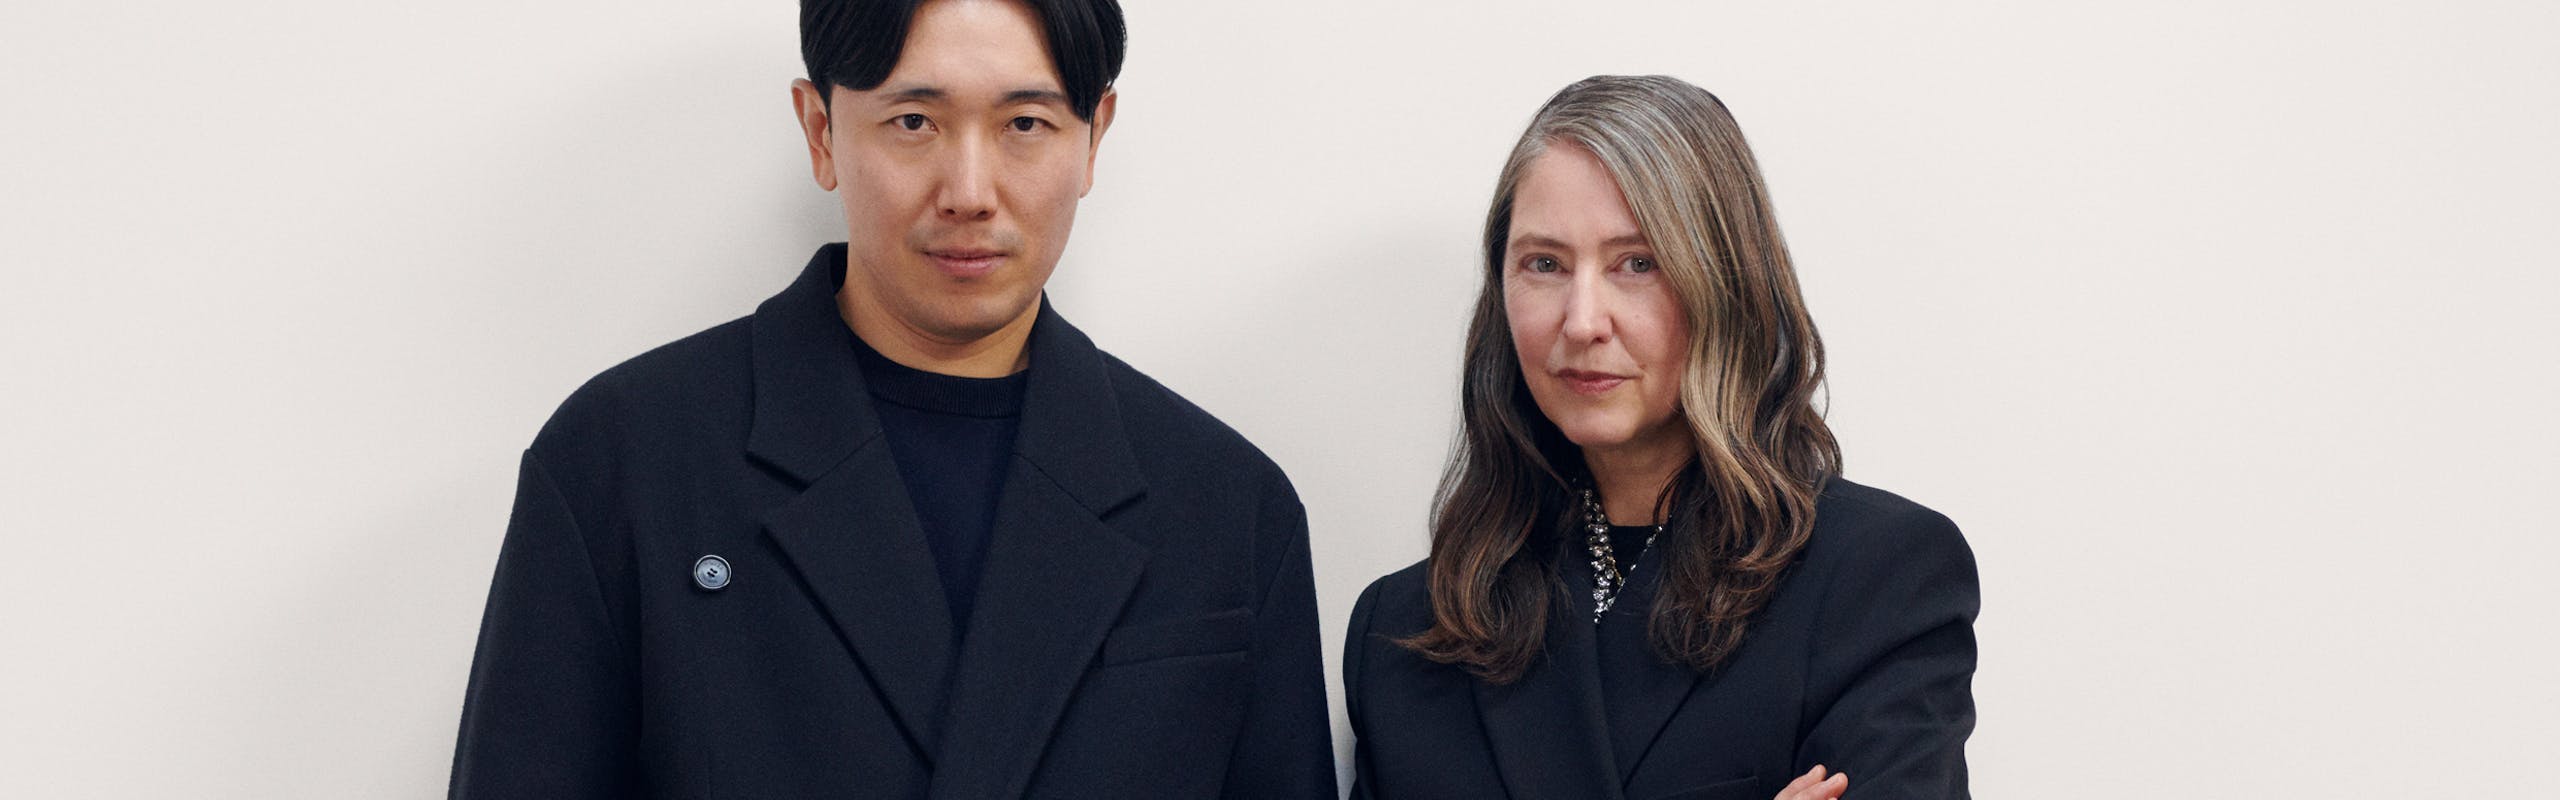 Interview: H&M's Ann-Sofie Johansson and Rokh Hwang on innovation and wearability